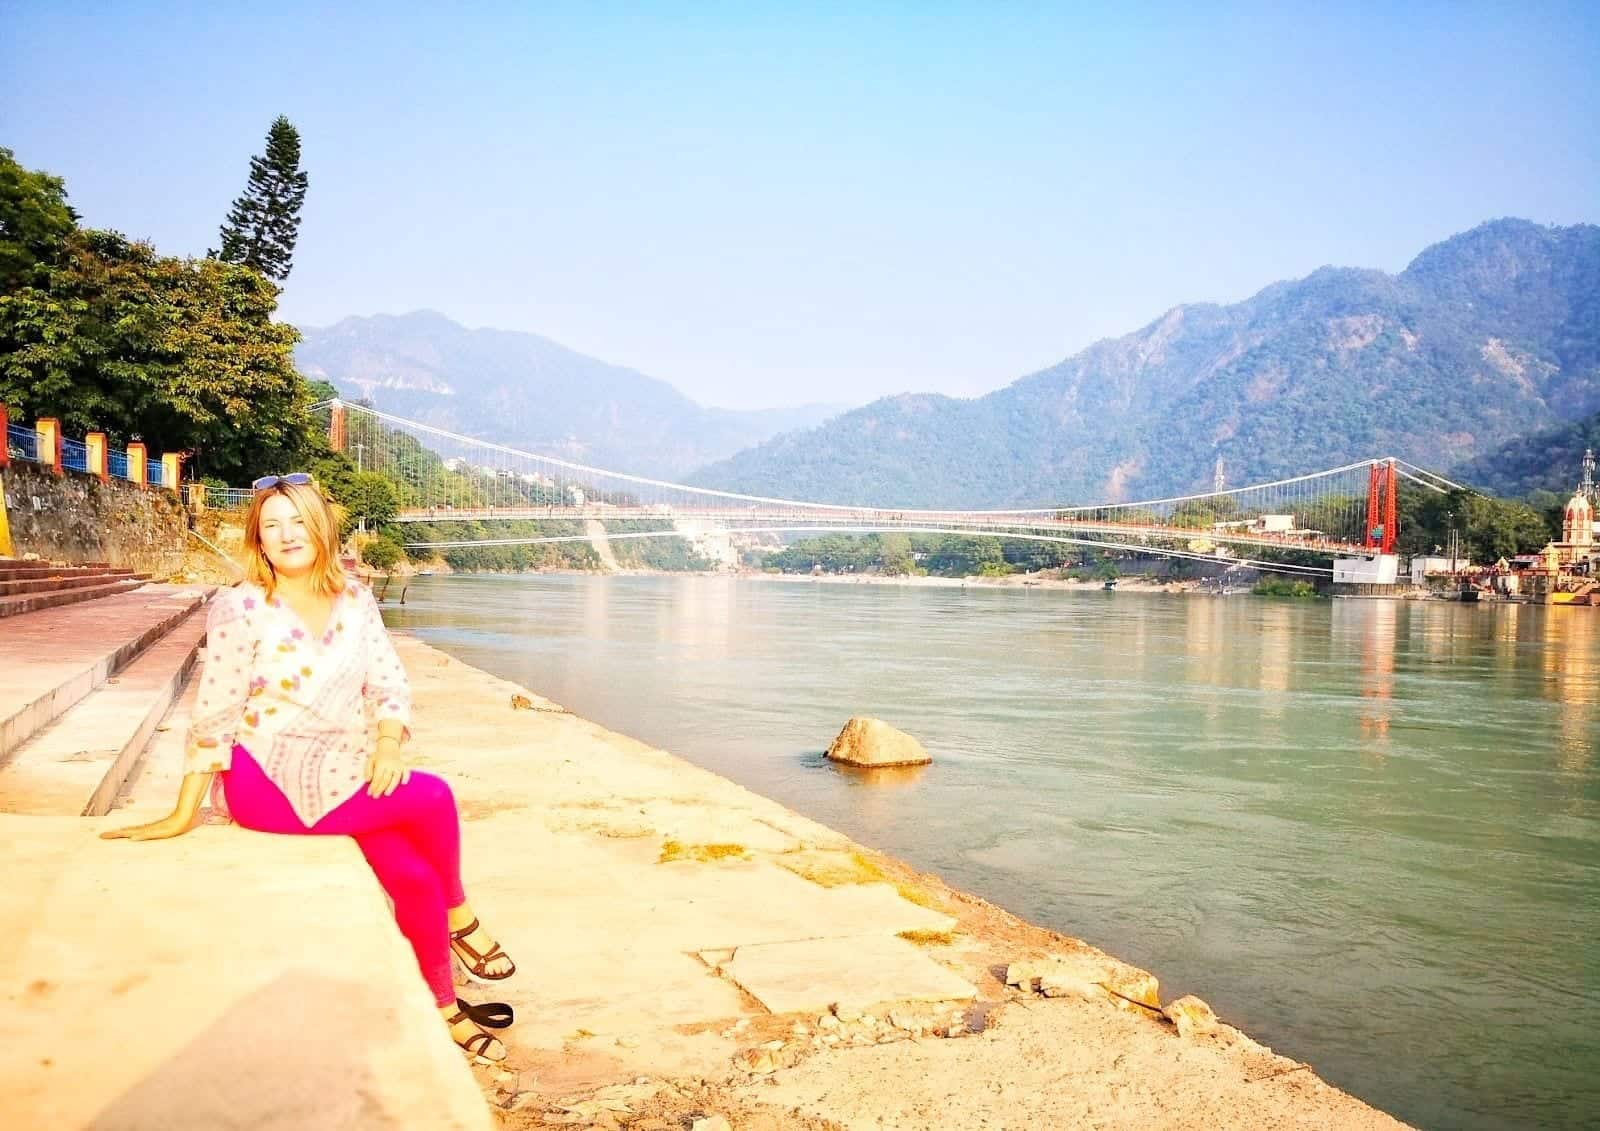 Mariellen Ward wears a white Indian top and pink trousers and poses on the banks of the Ganga river in Rishikesh, mountains behind her.